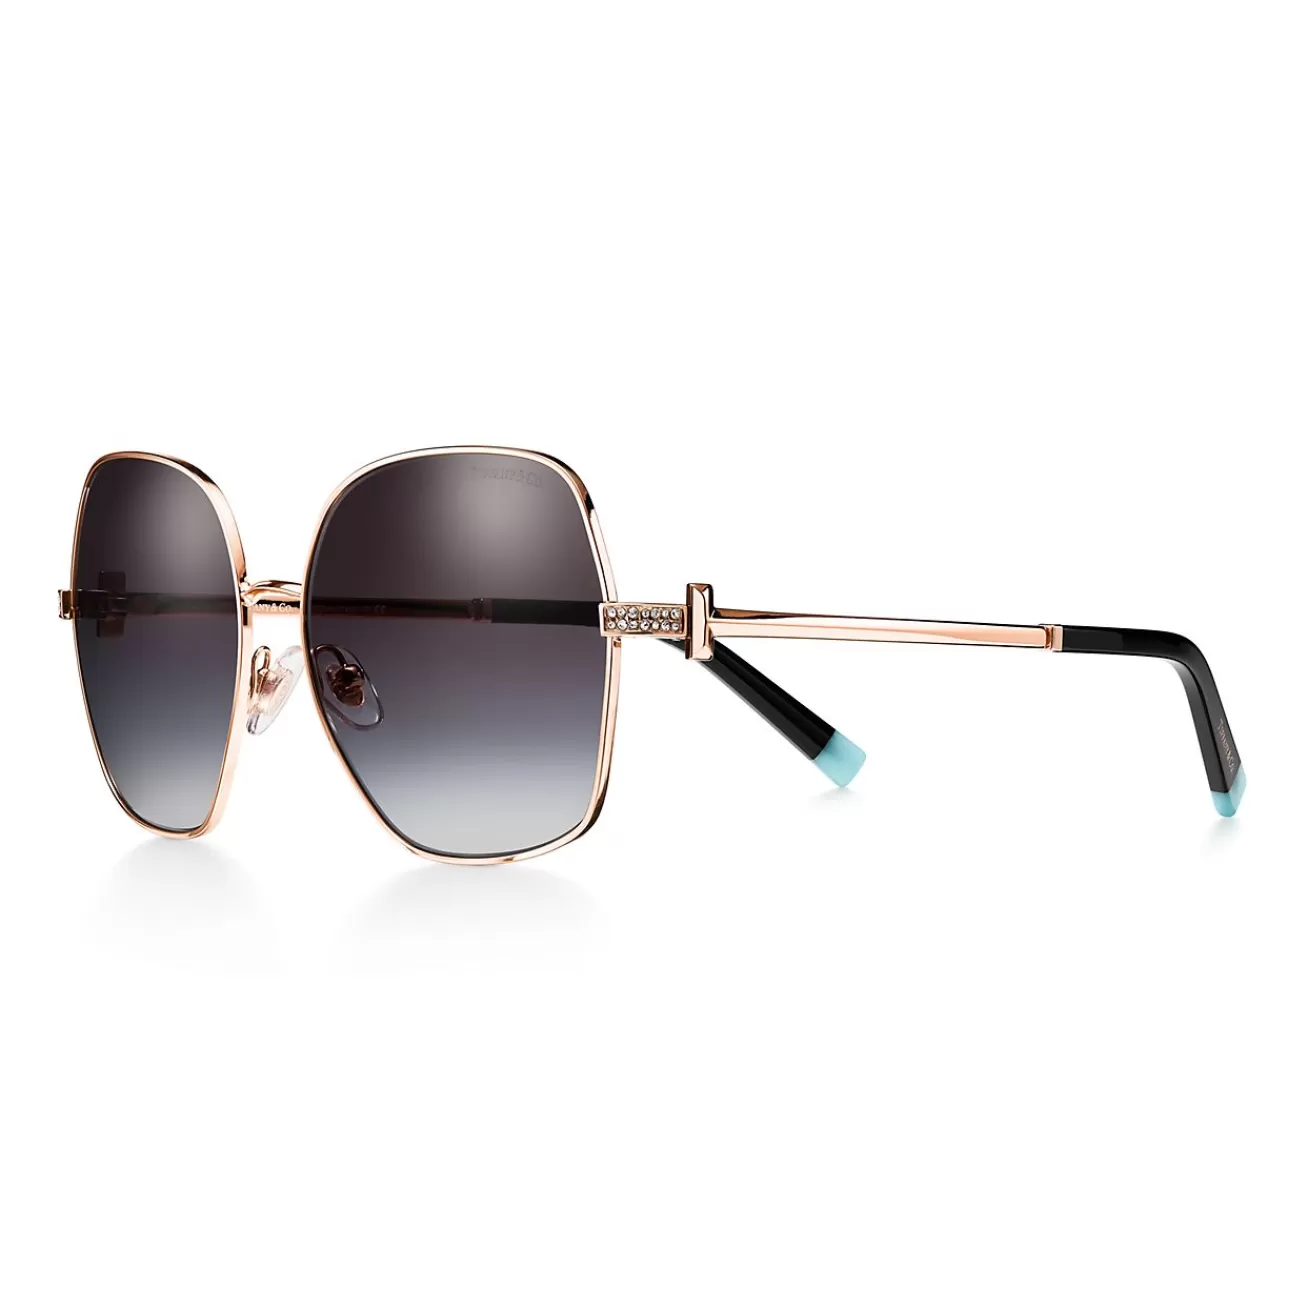 Tiffany & Co. Tiffany T Sunglasses in Pale Gold-colored Metal with Gradient Gray Lenses | ^ Tiffany T | Sunglasses